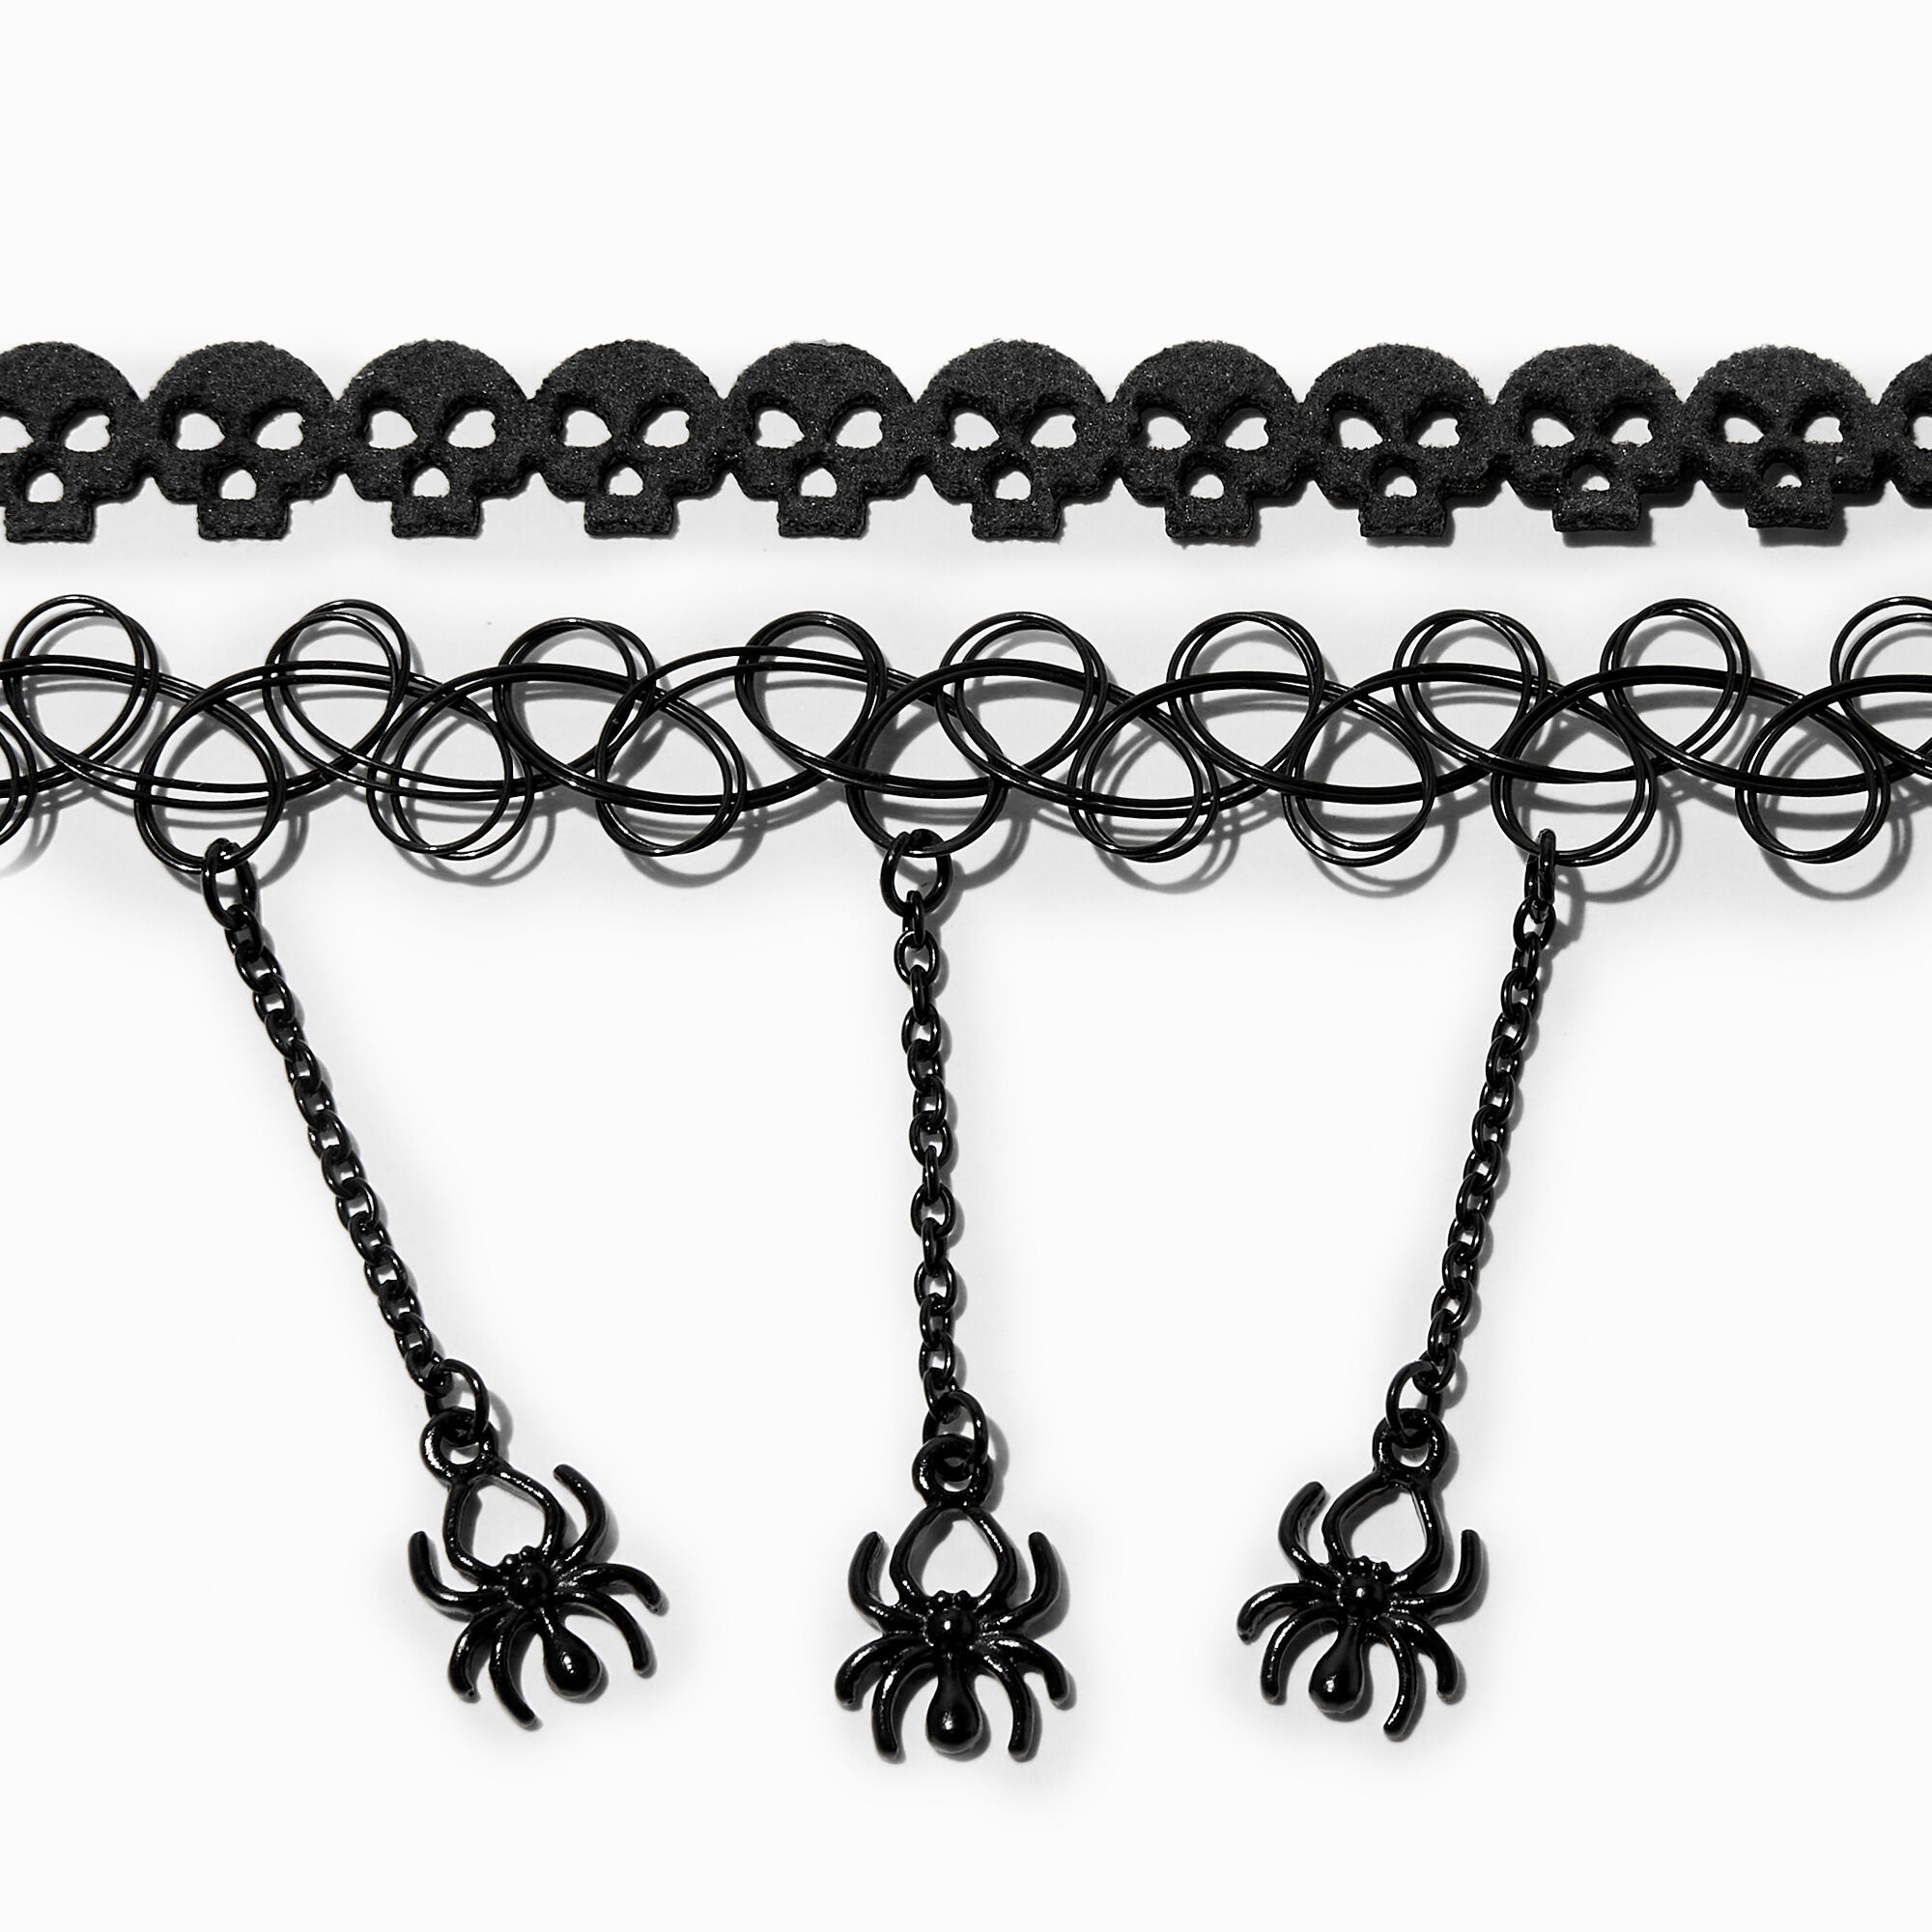 View Claires Skulls Spiders Choker Necklace Set 2 Pack Black information